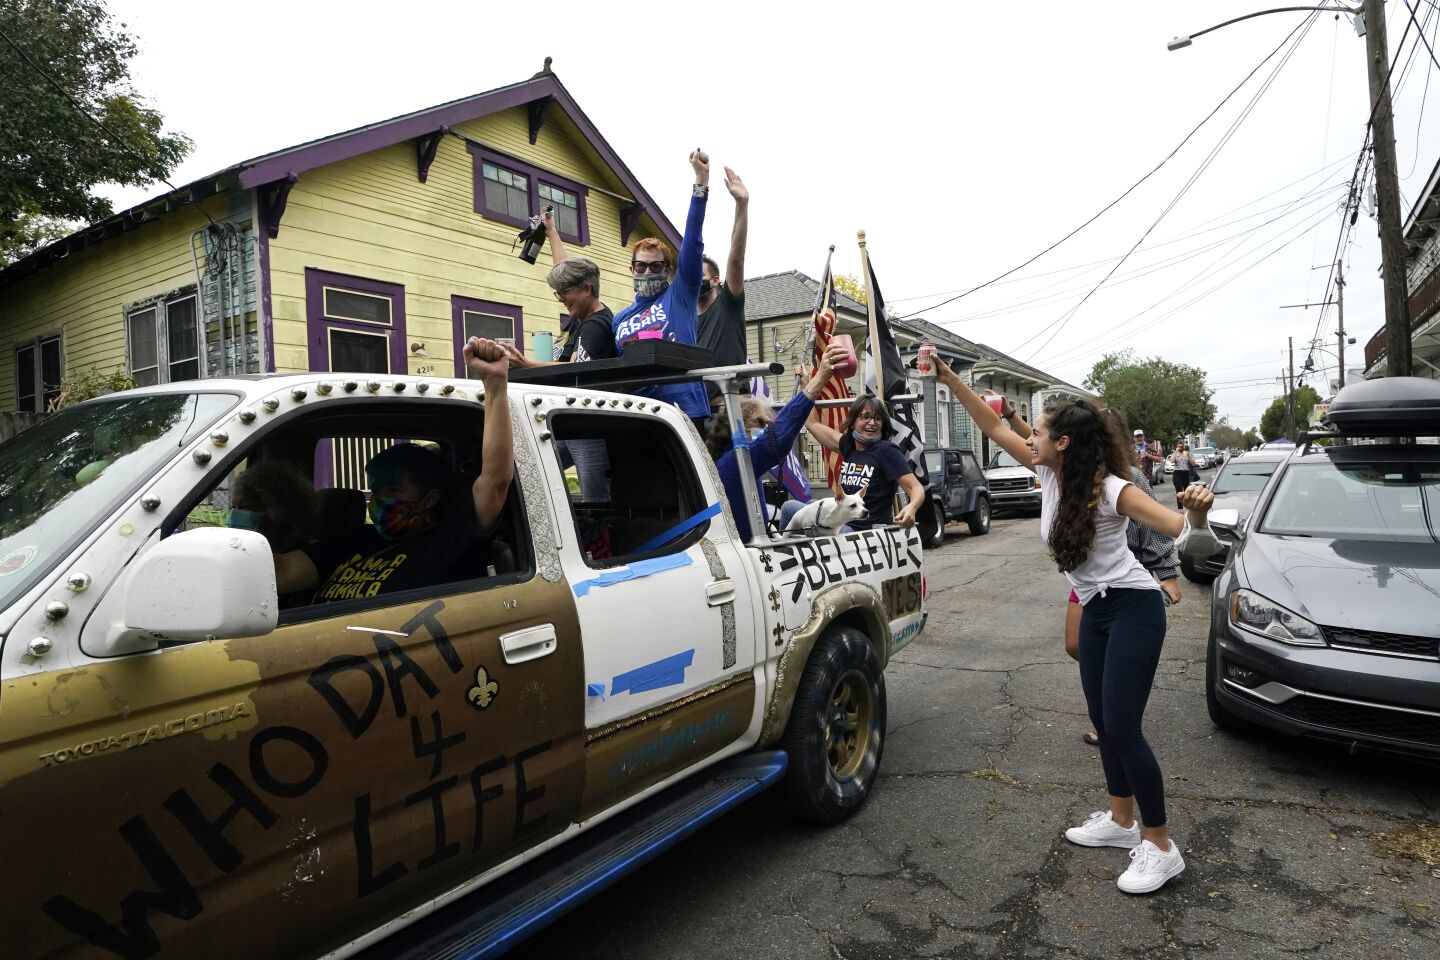 People celebrate in New Orleans after news organizations called the presidential election in favor of Joe Biden